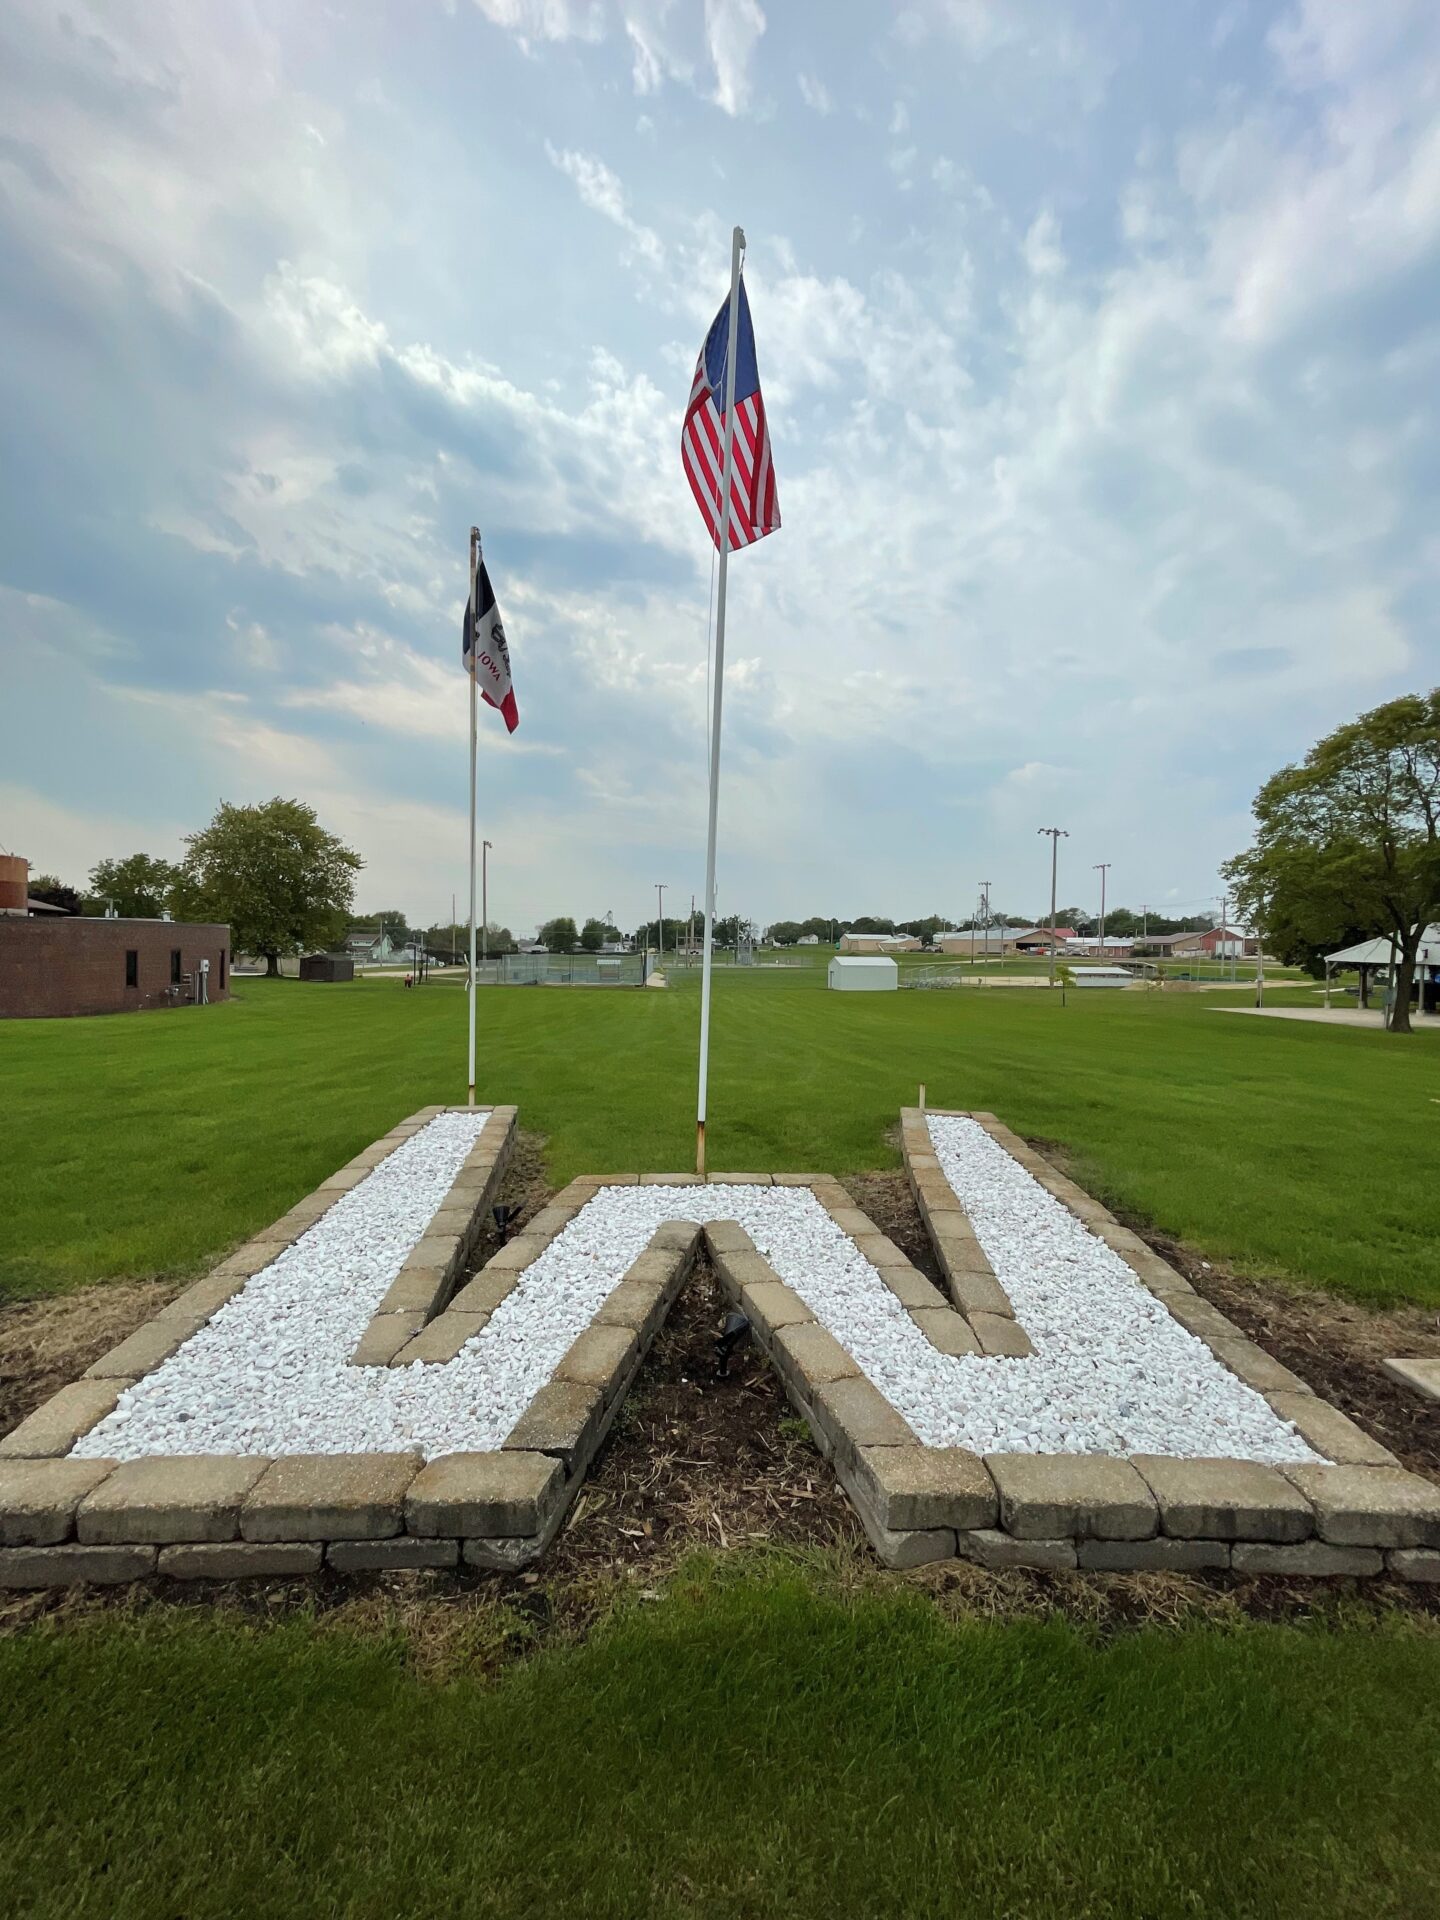 landscaped "W" with iowa flag and US flag flying